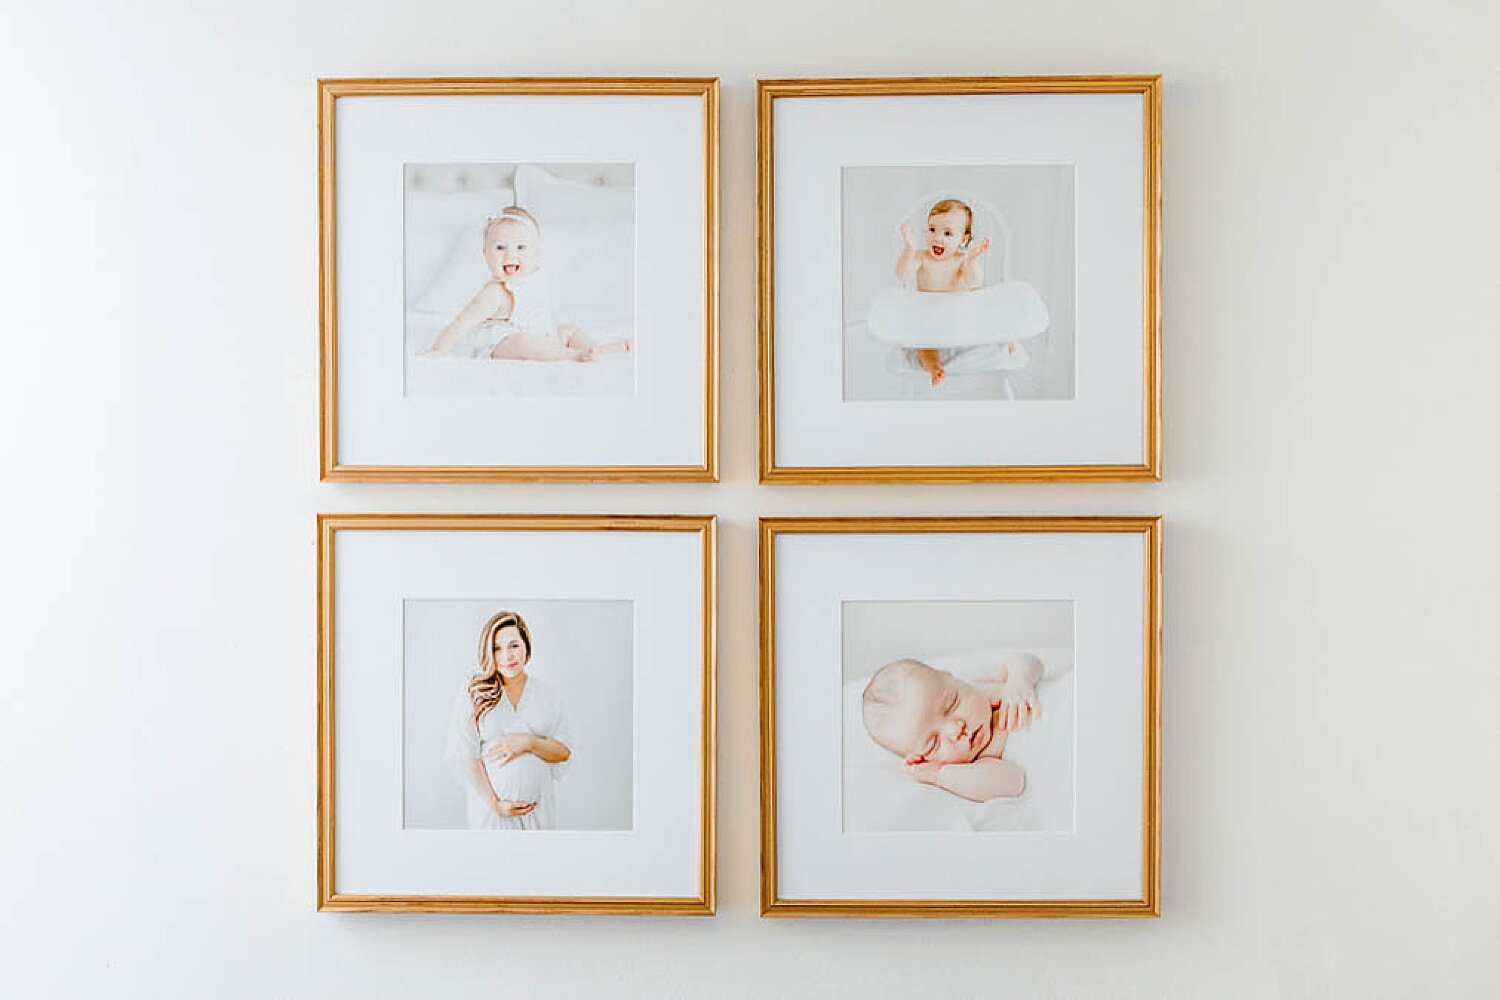 Connecticut Newborn and Family Photographer, Kristin Wood Photography, photographs baby's first year and installs custom frames in client's home. 